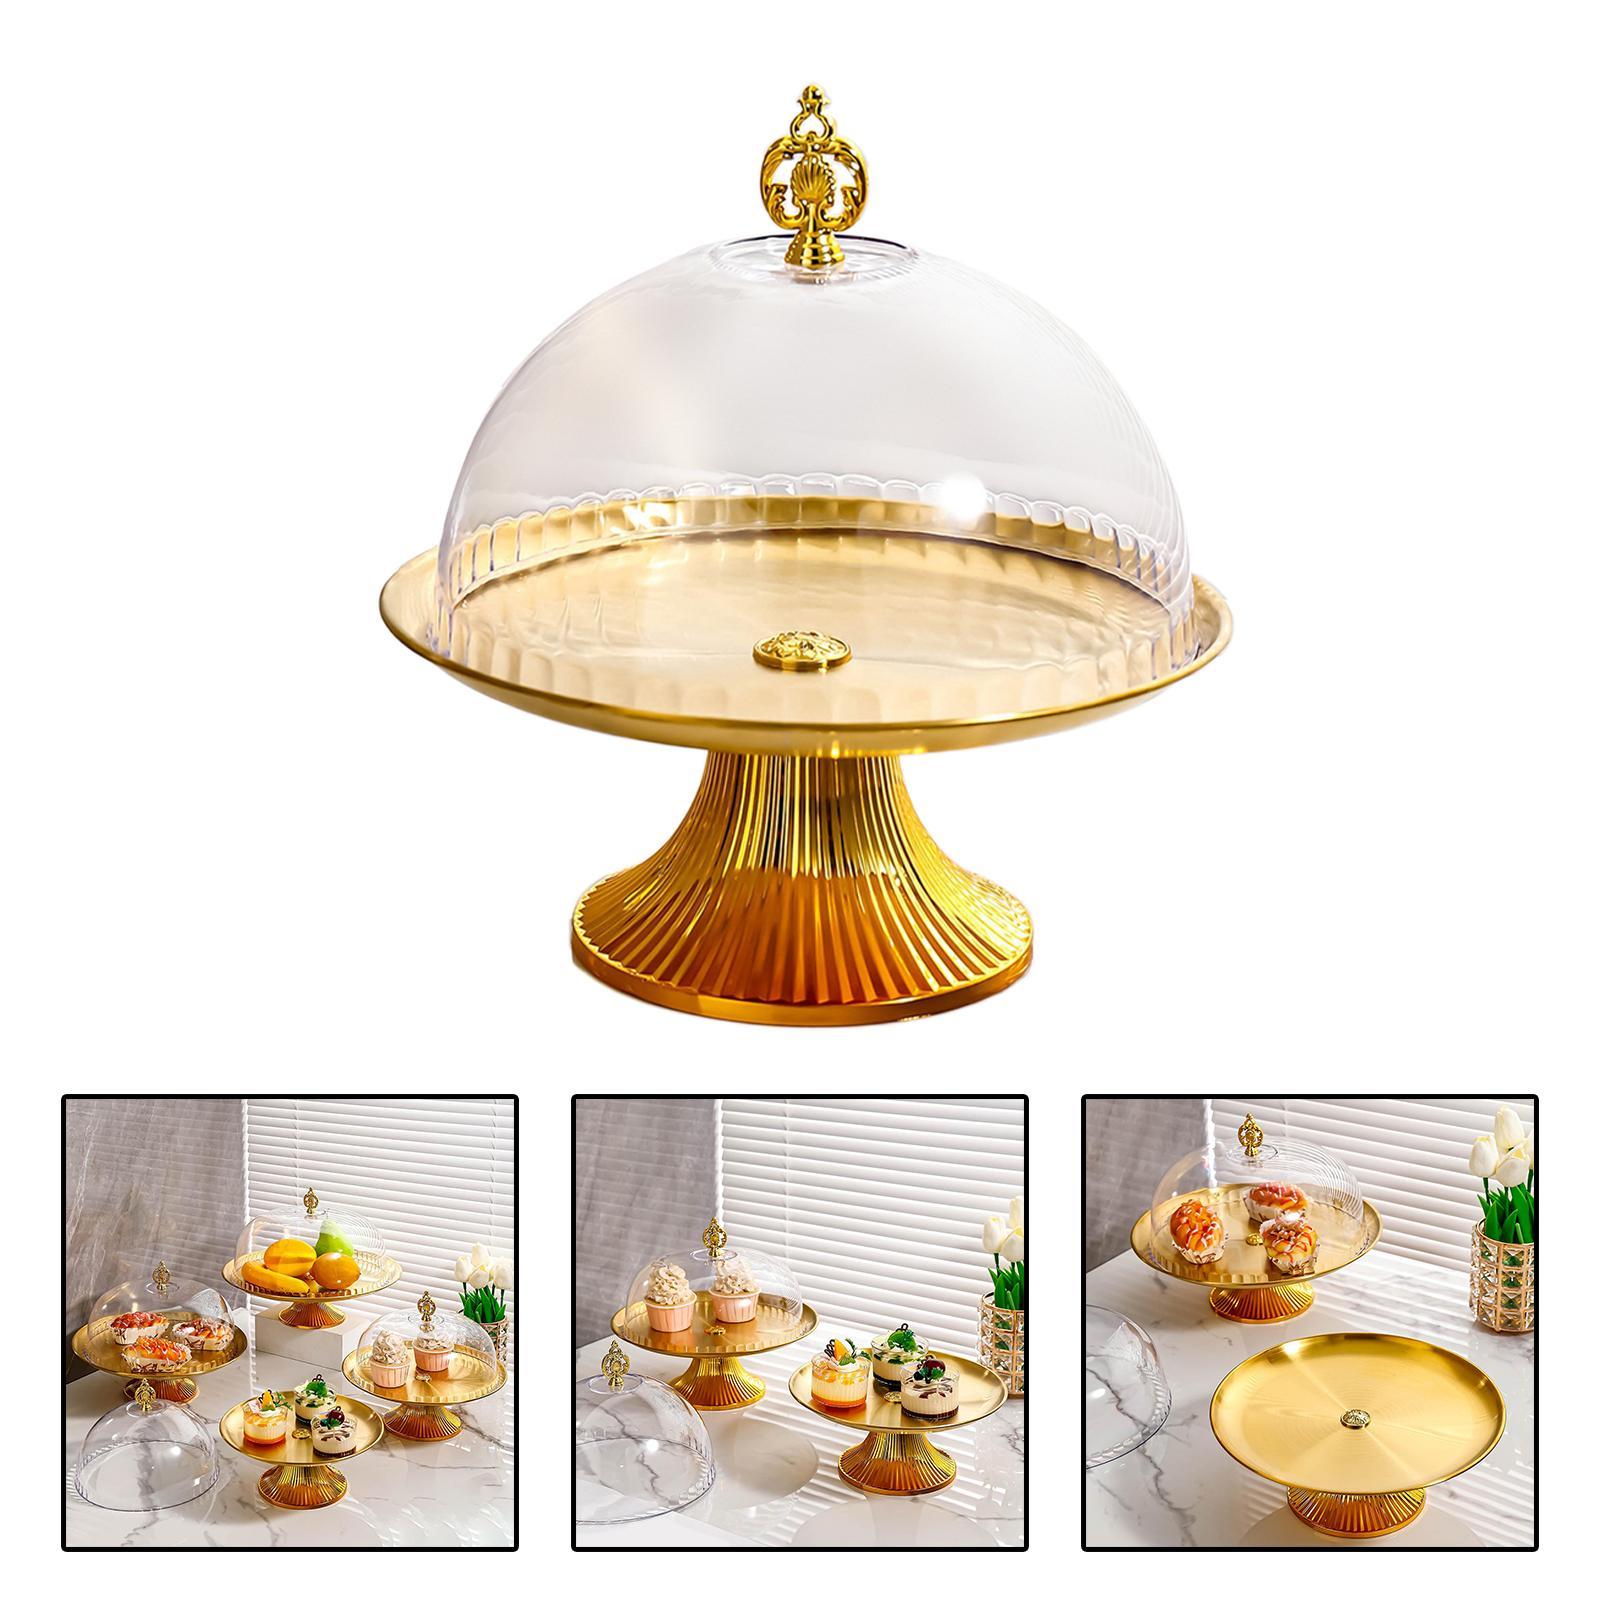 Stainless Steel Cake Stand Cake Plate for Wedding Celebration Brithday Party